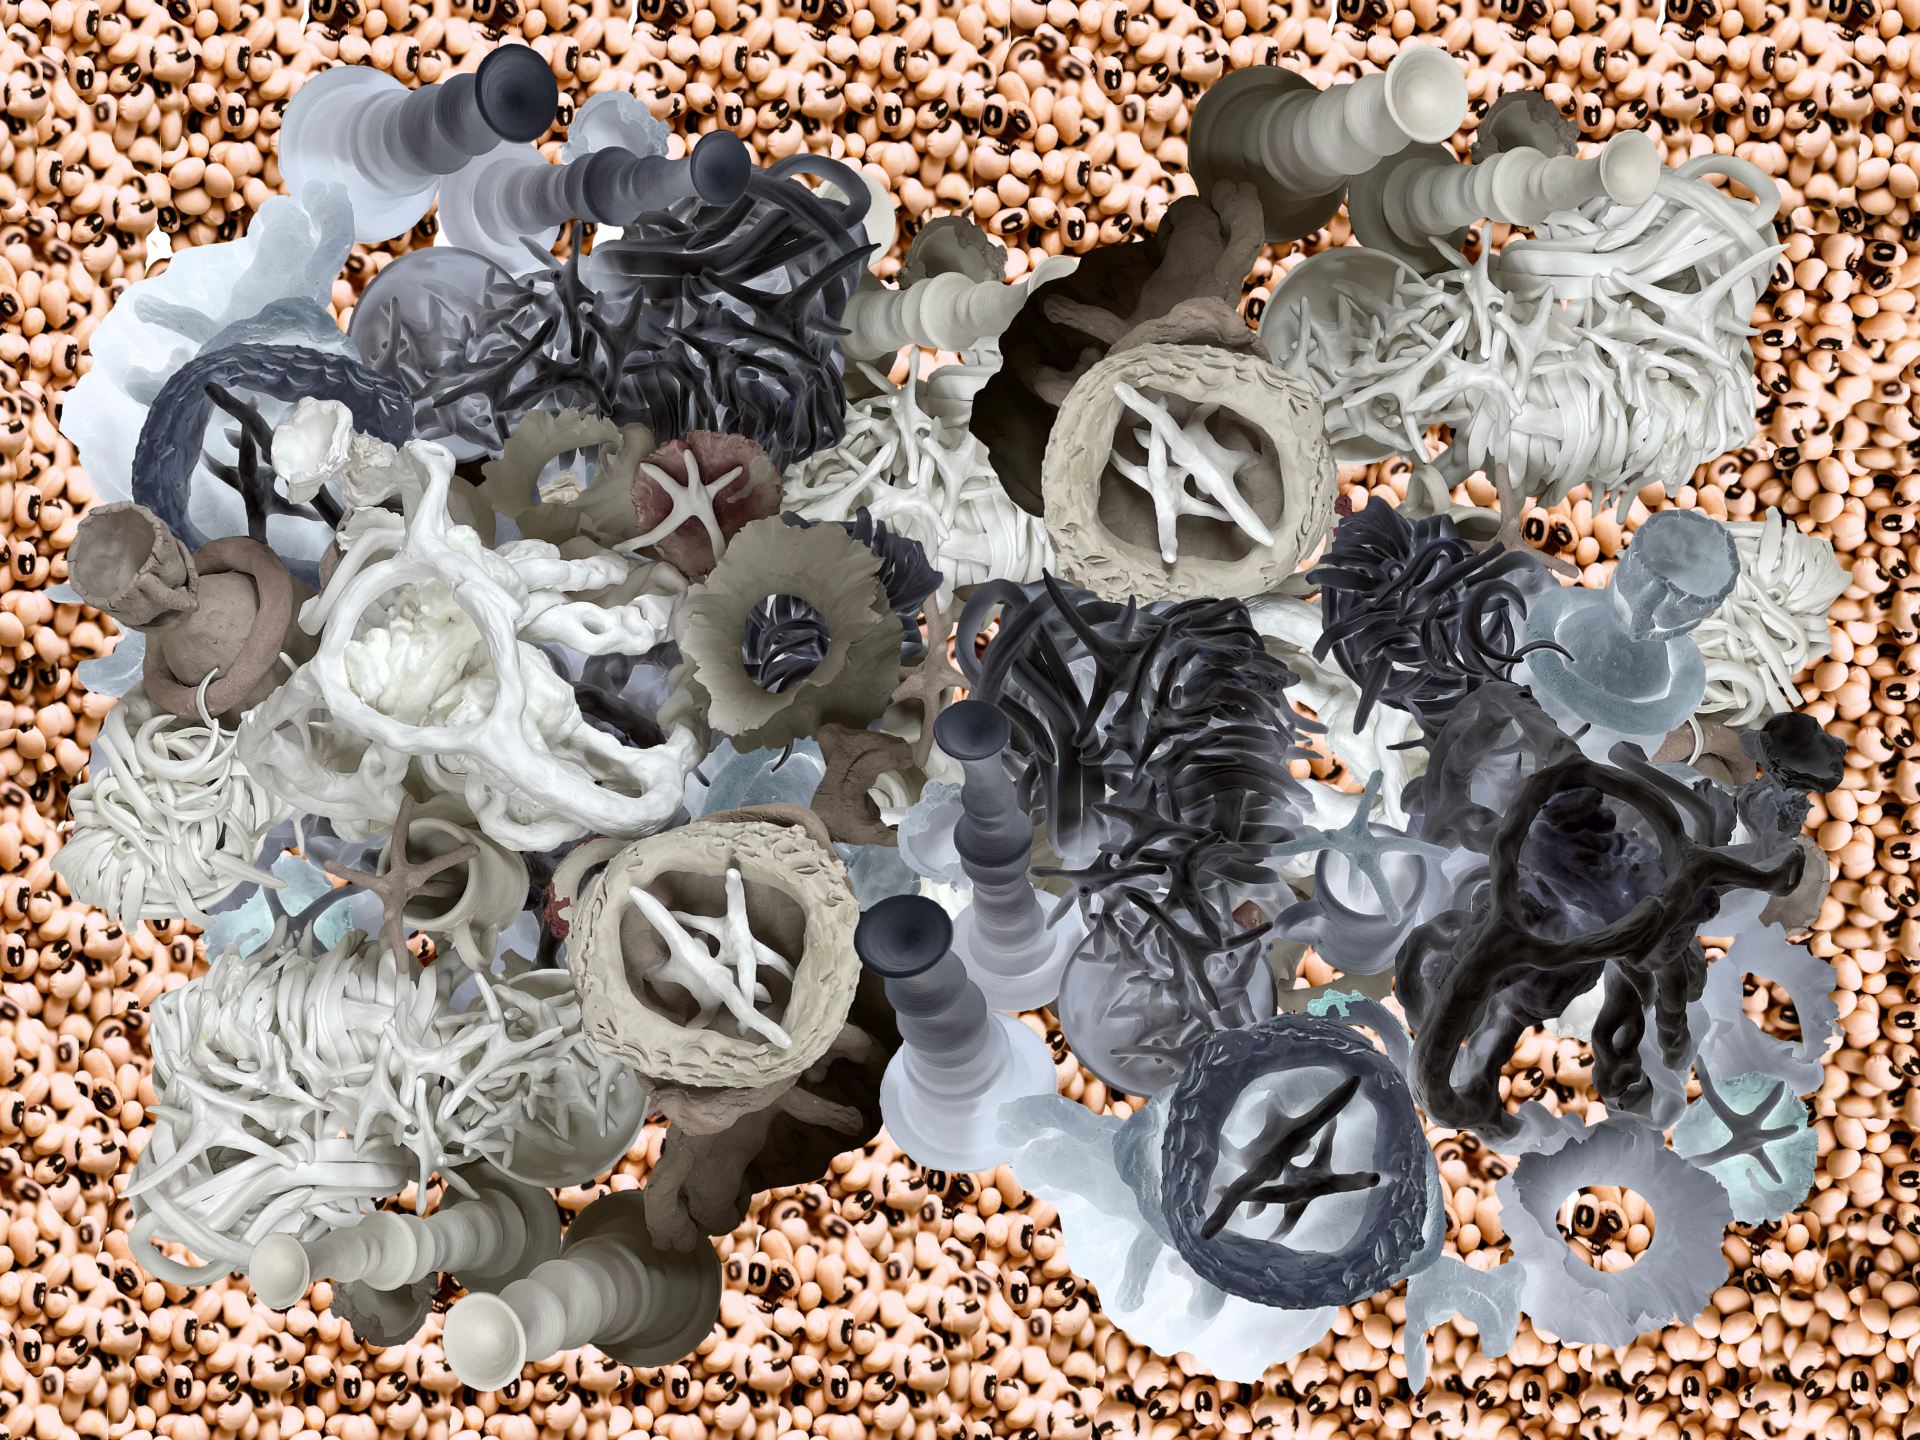 a collage of ceramic wobbly sculptures clustered on a flat bed of bung beans - birds' eye view.